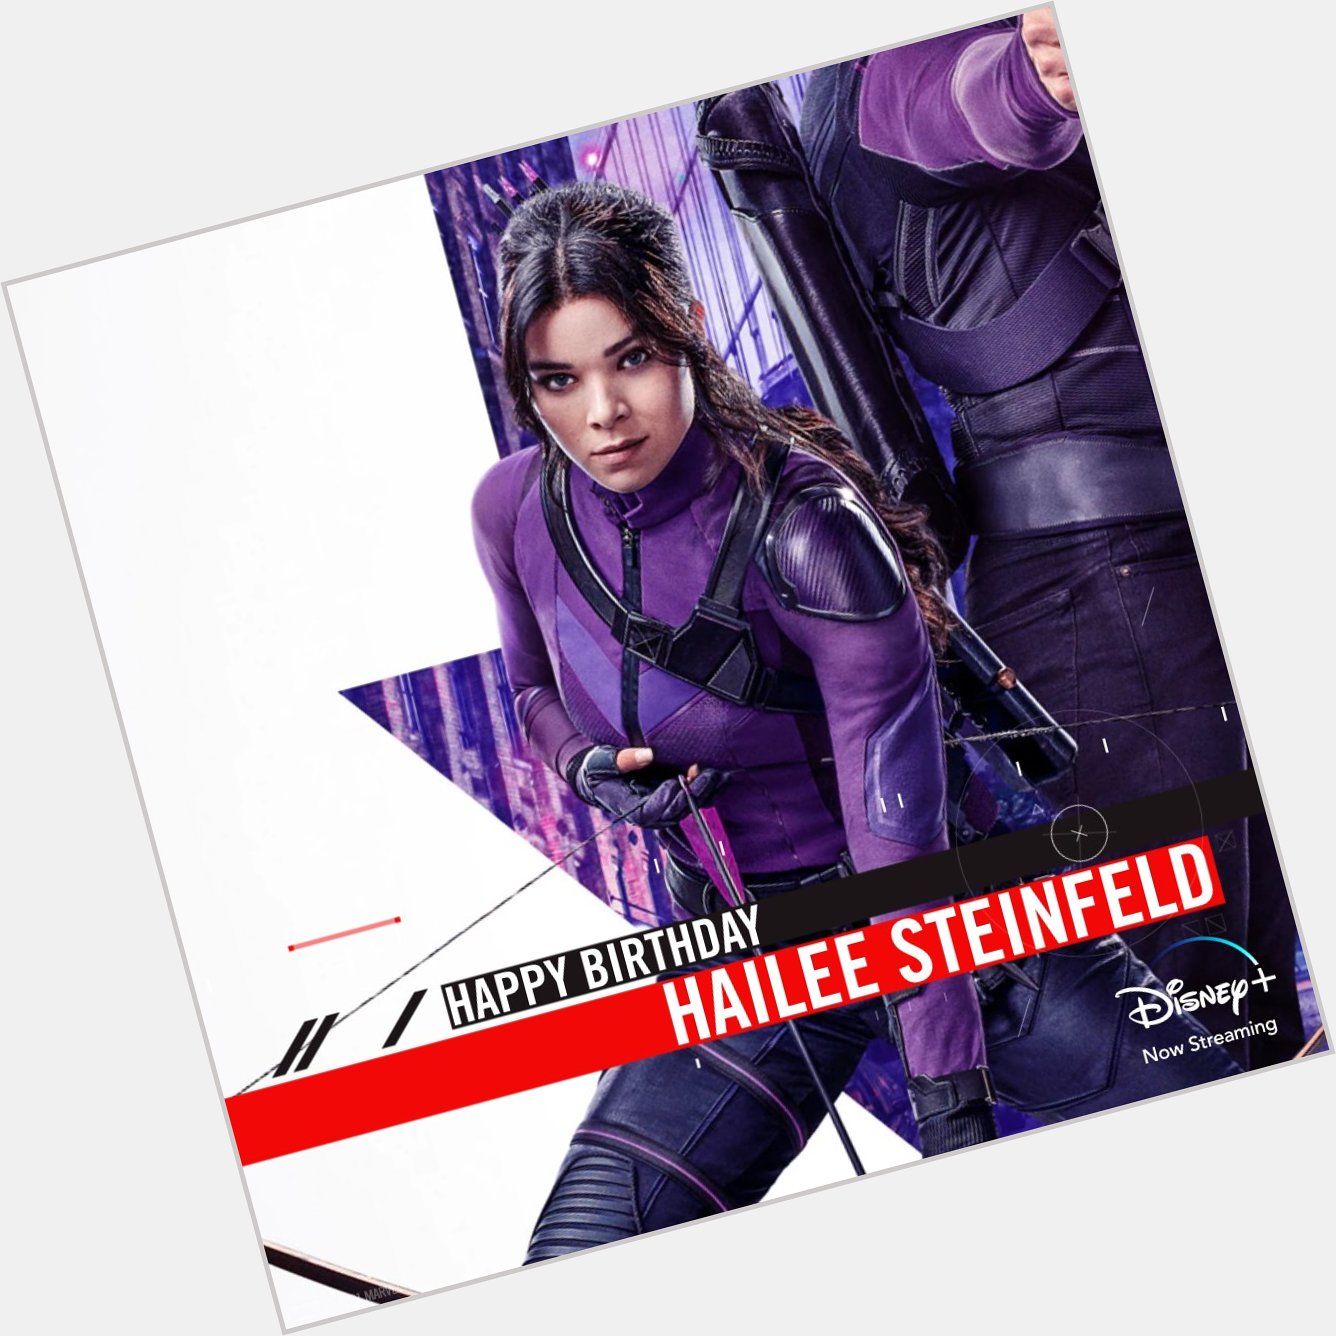 Tis the season to celebrate! Join us in wishing our Hailee Steinfeld a happy birthday. 